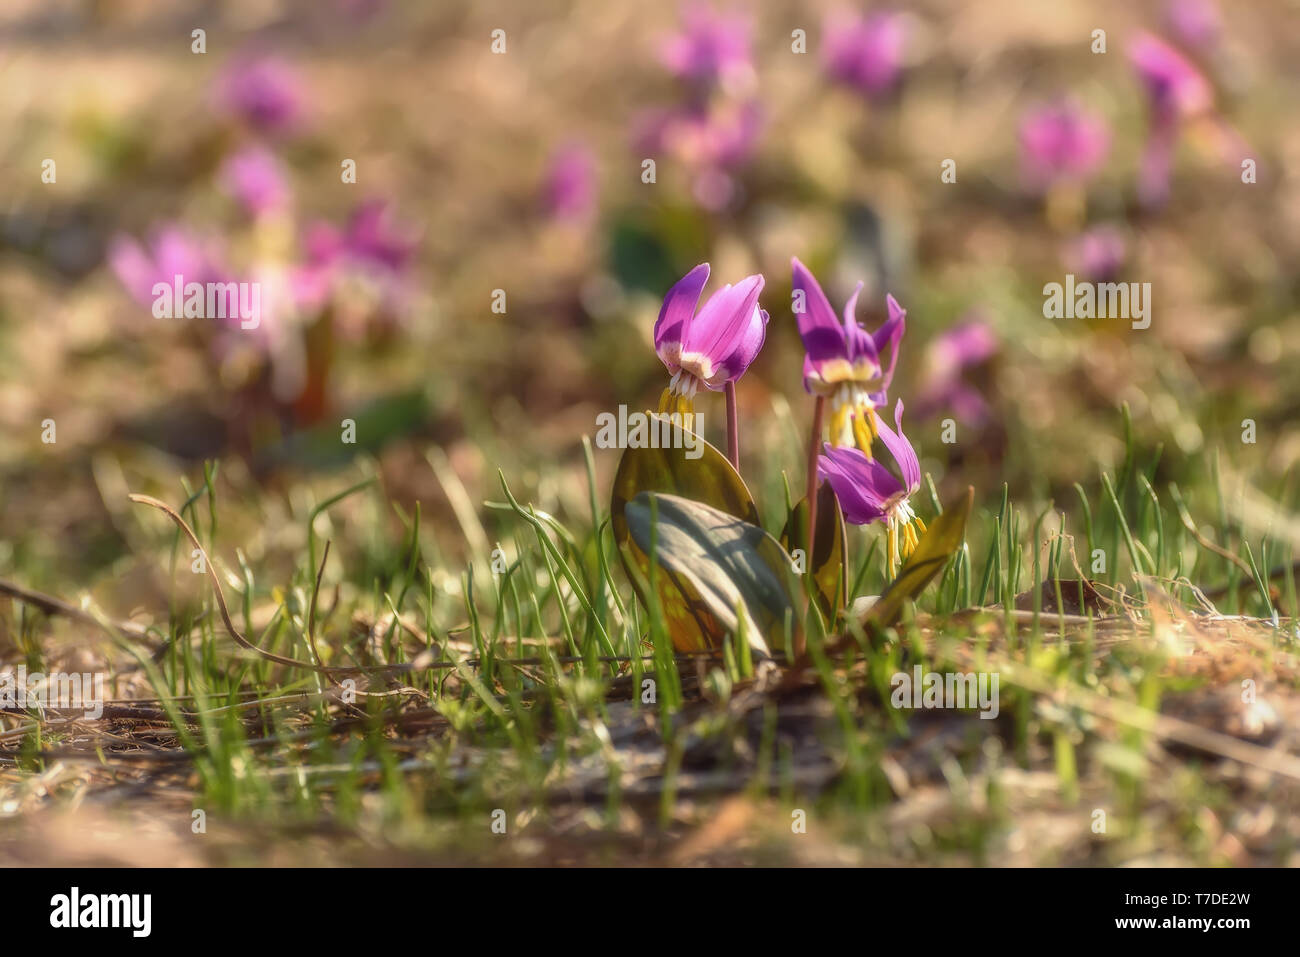 Amazing floral background with first spring pink wildflowers of Erythronium sibiricum in a meadow close up Stock Photo